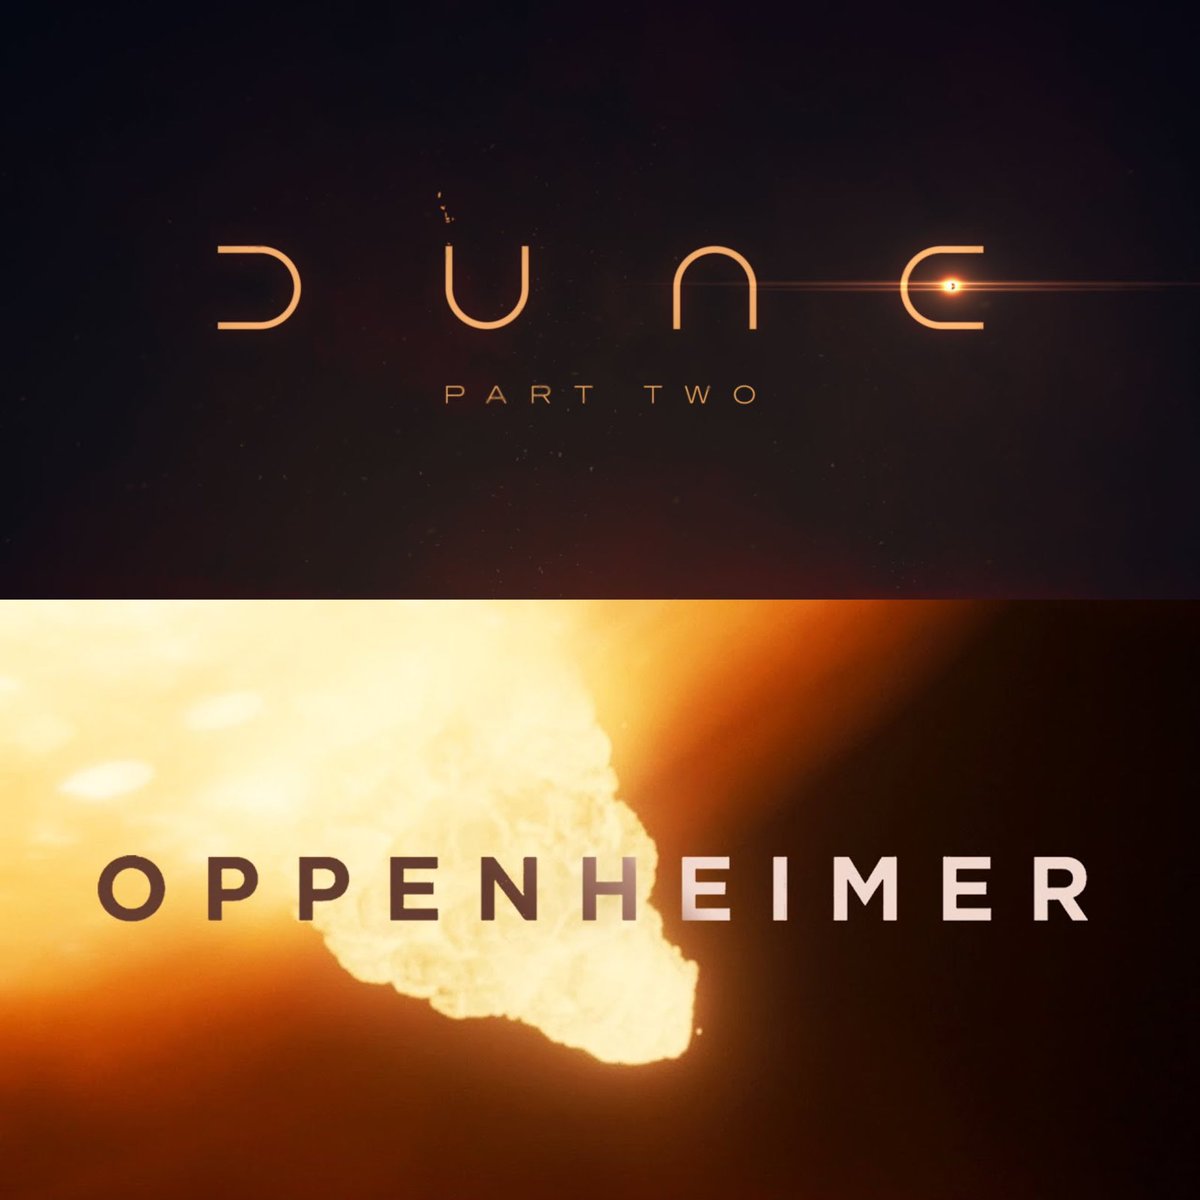 Hearing rumors the IMAX fall season is a little dry that #DunePartTwo and #Oppenheimer might be coming back